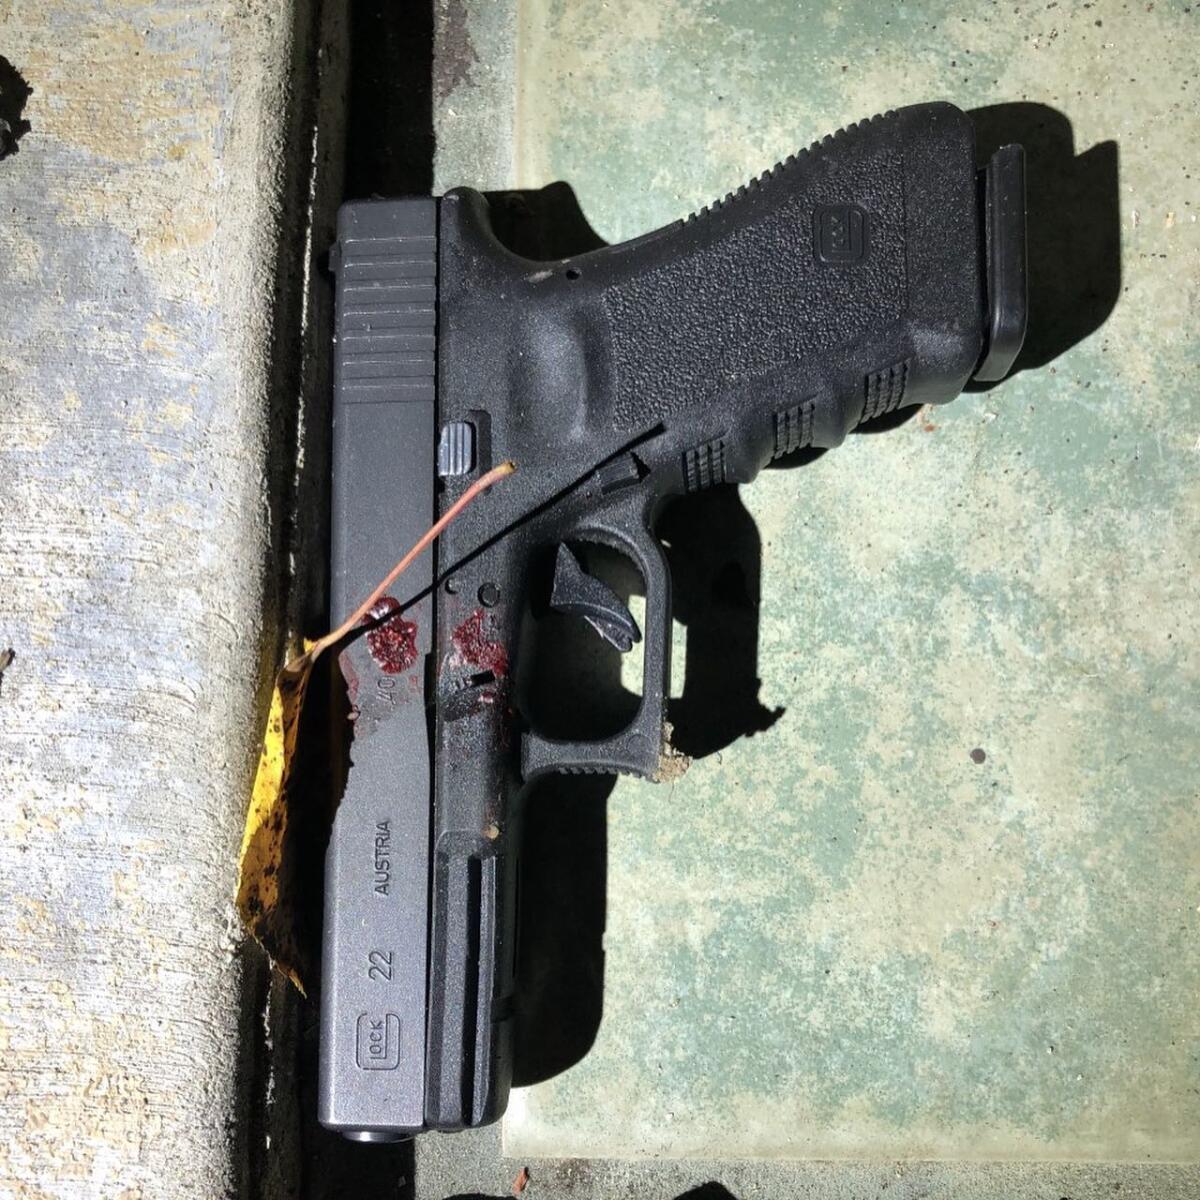 This handgun was found near a man shot and killed by Seal Beach police Monday.